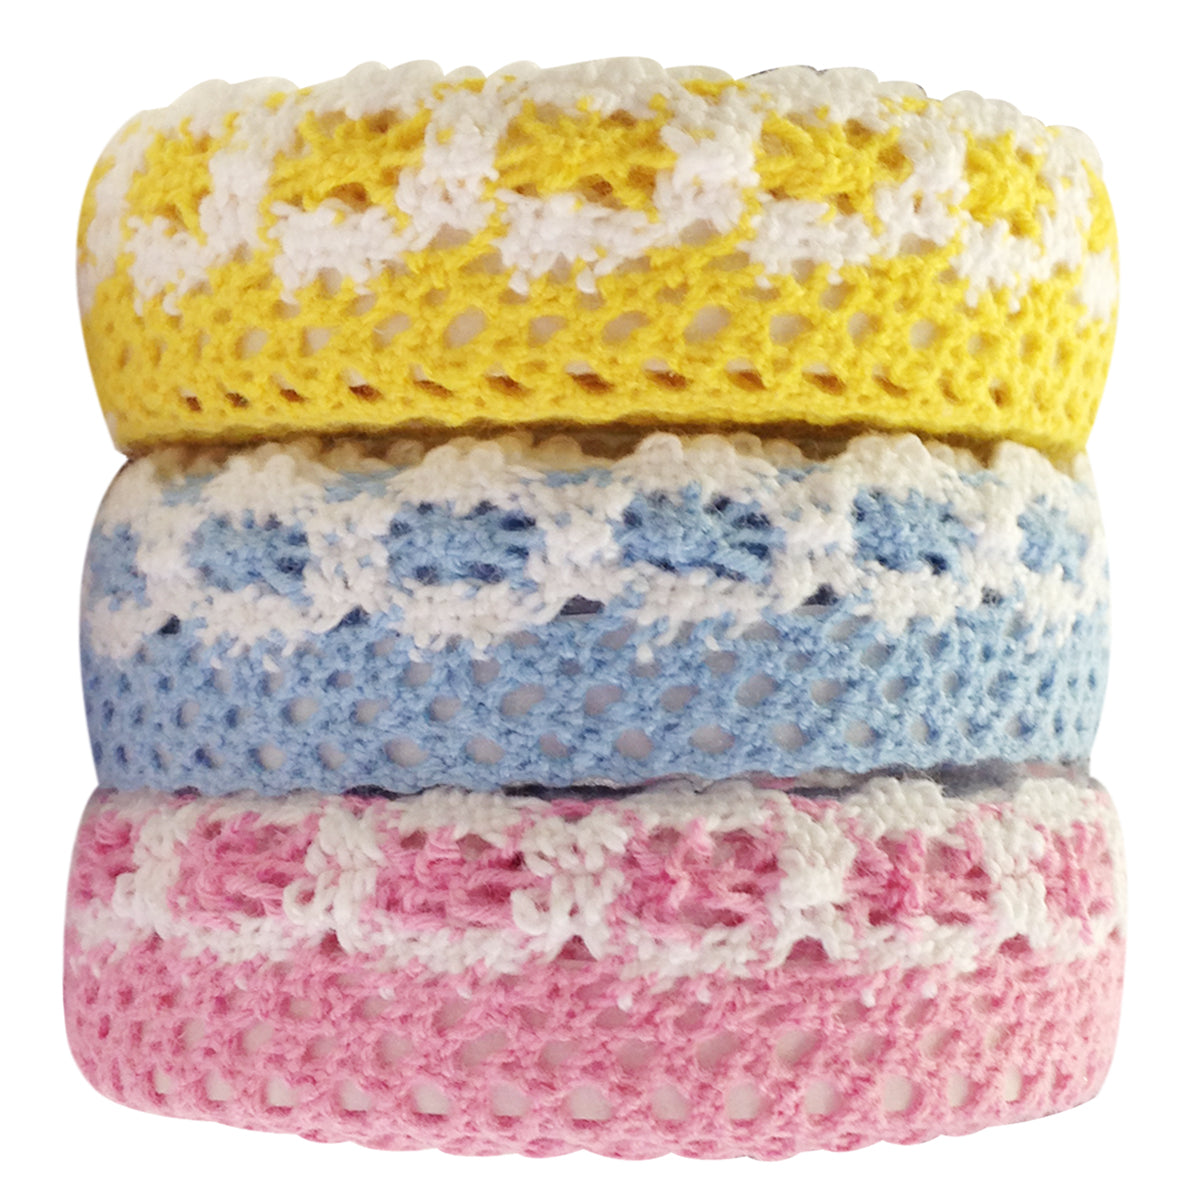 Wrapables Colorful Decorative Adhesive Lace Tape Set Of 3 ( Yellow, Blue, Pink)